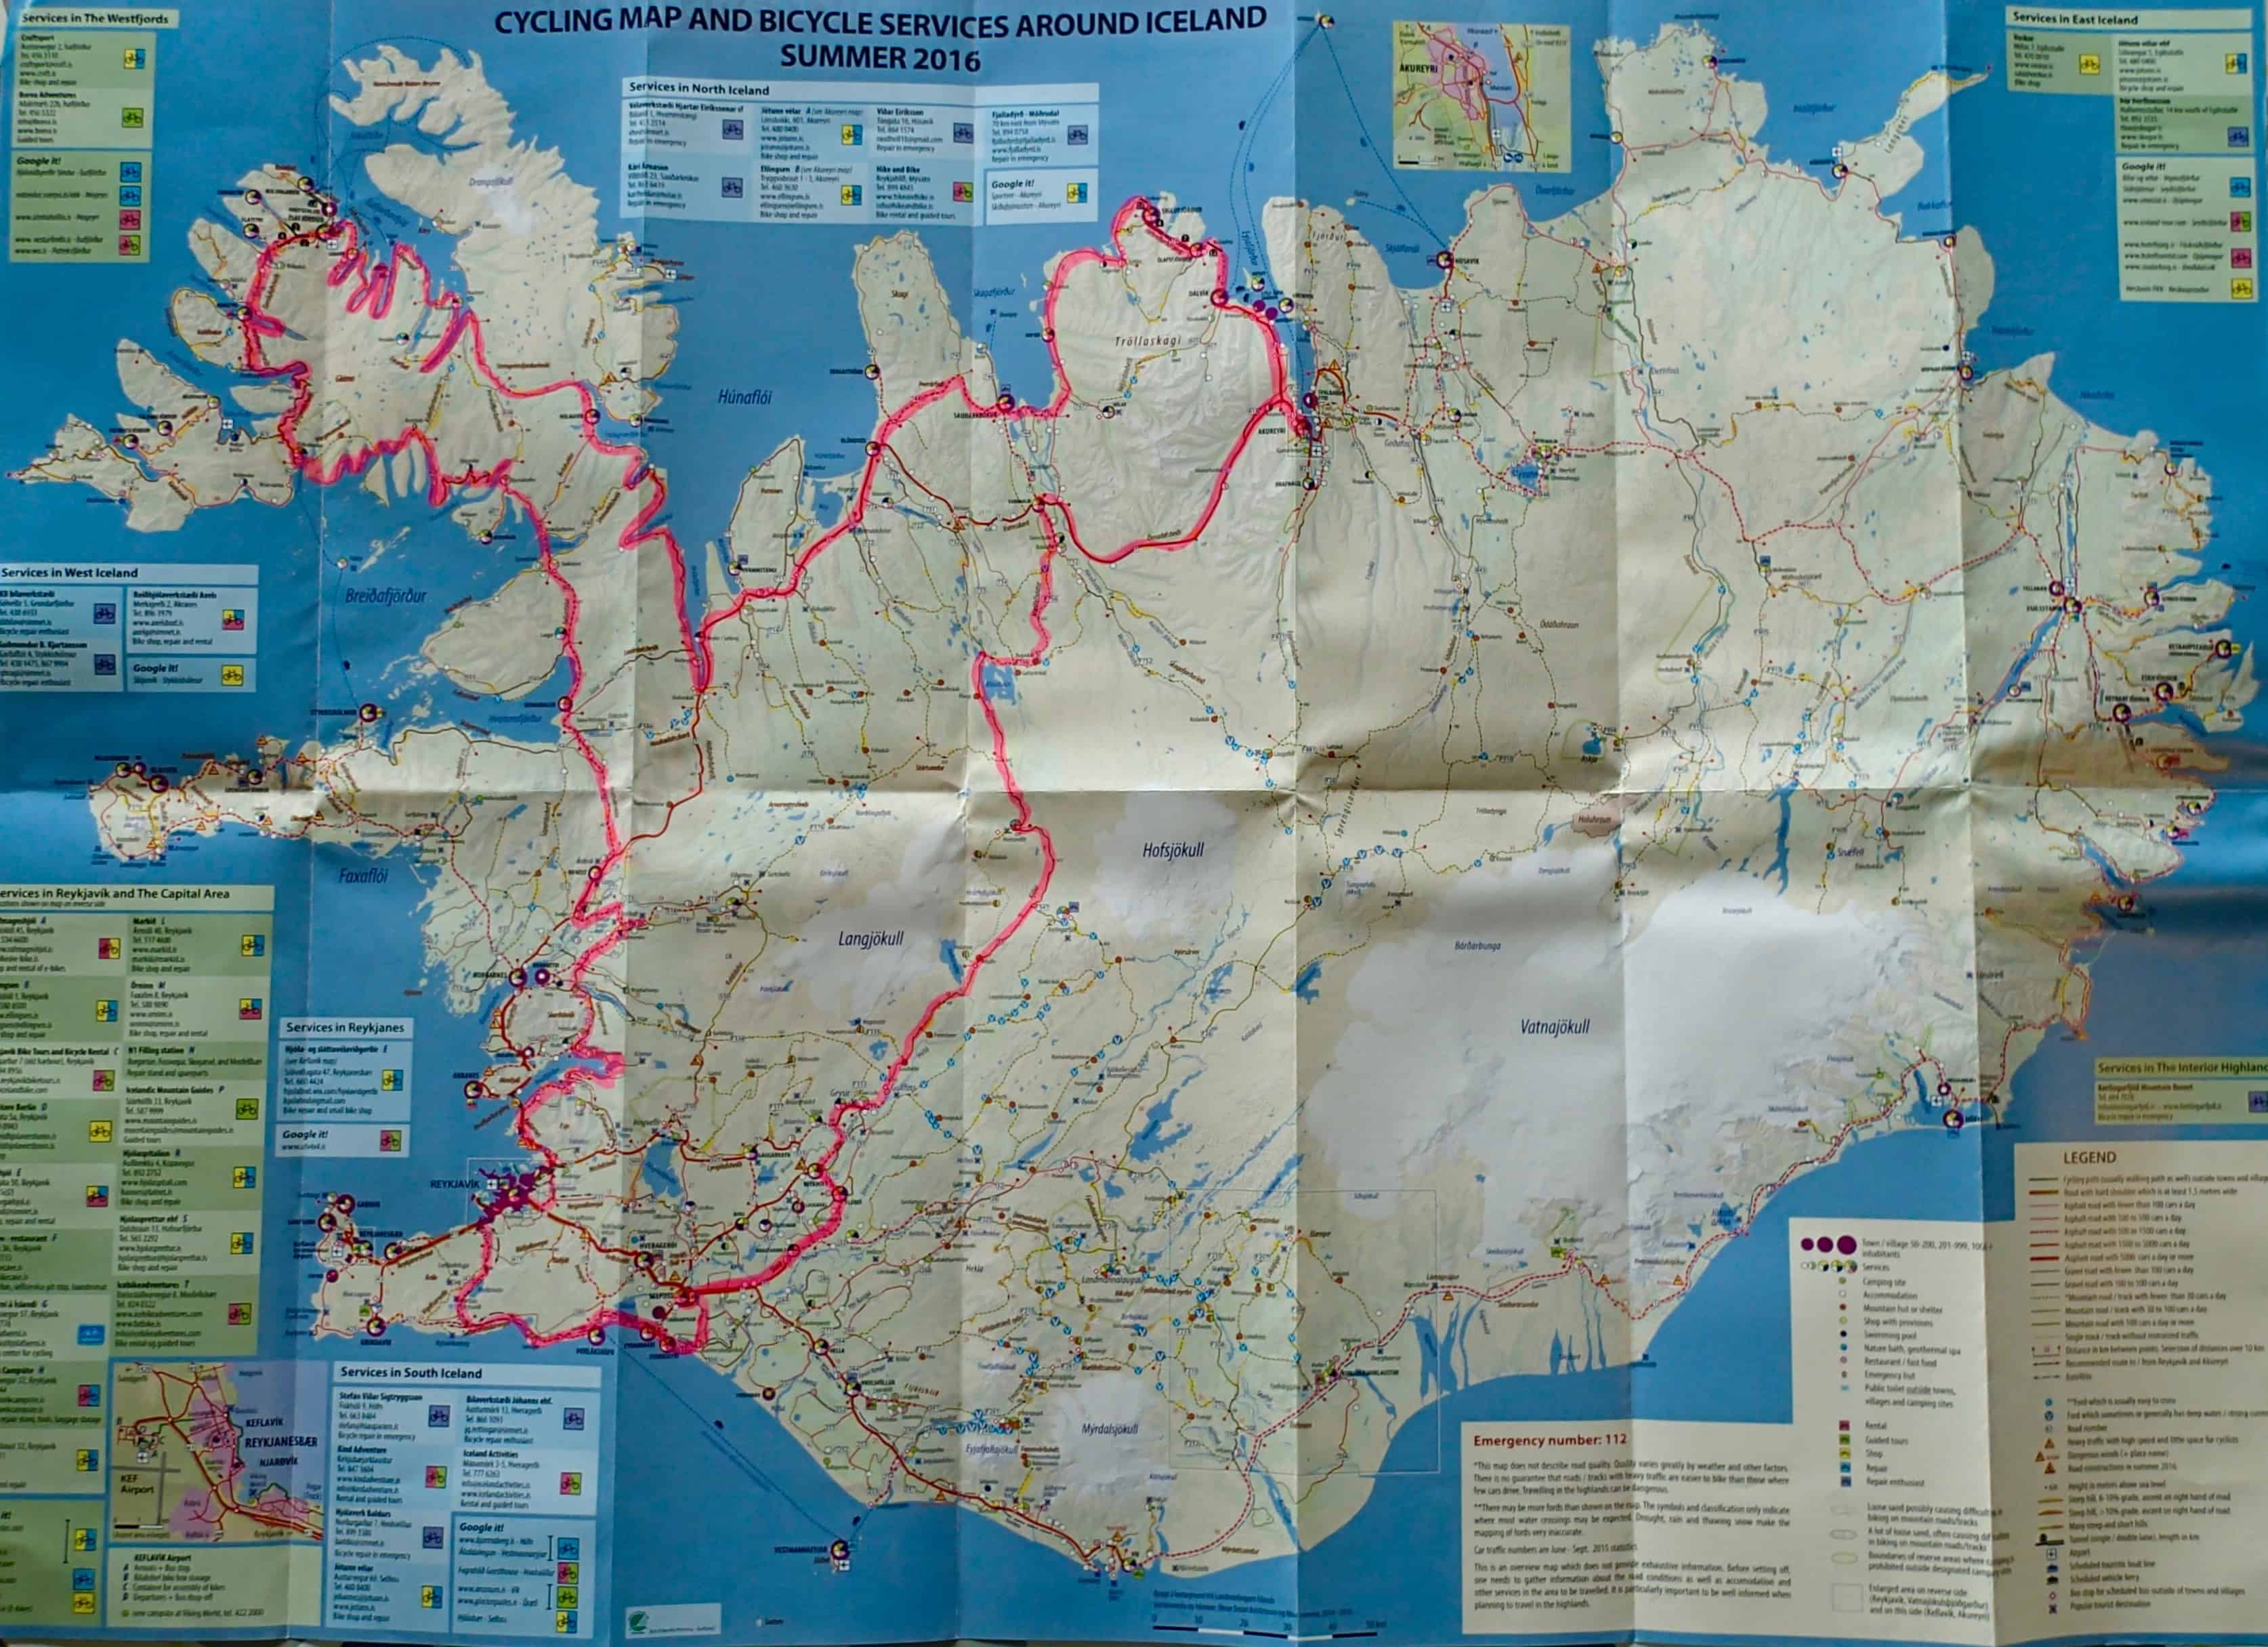 My route in Iceland